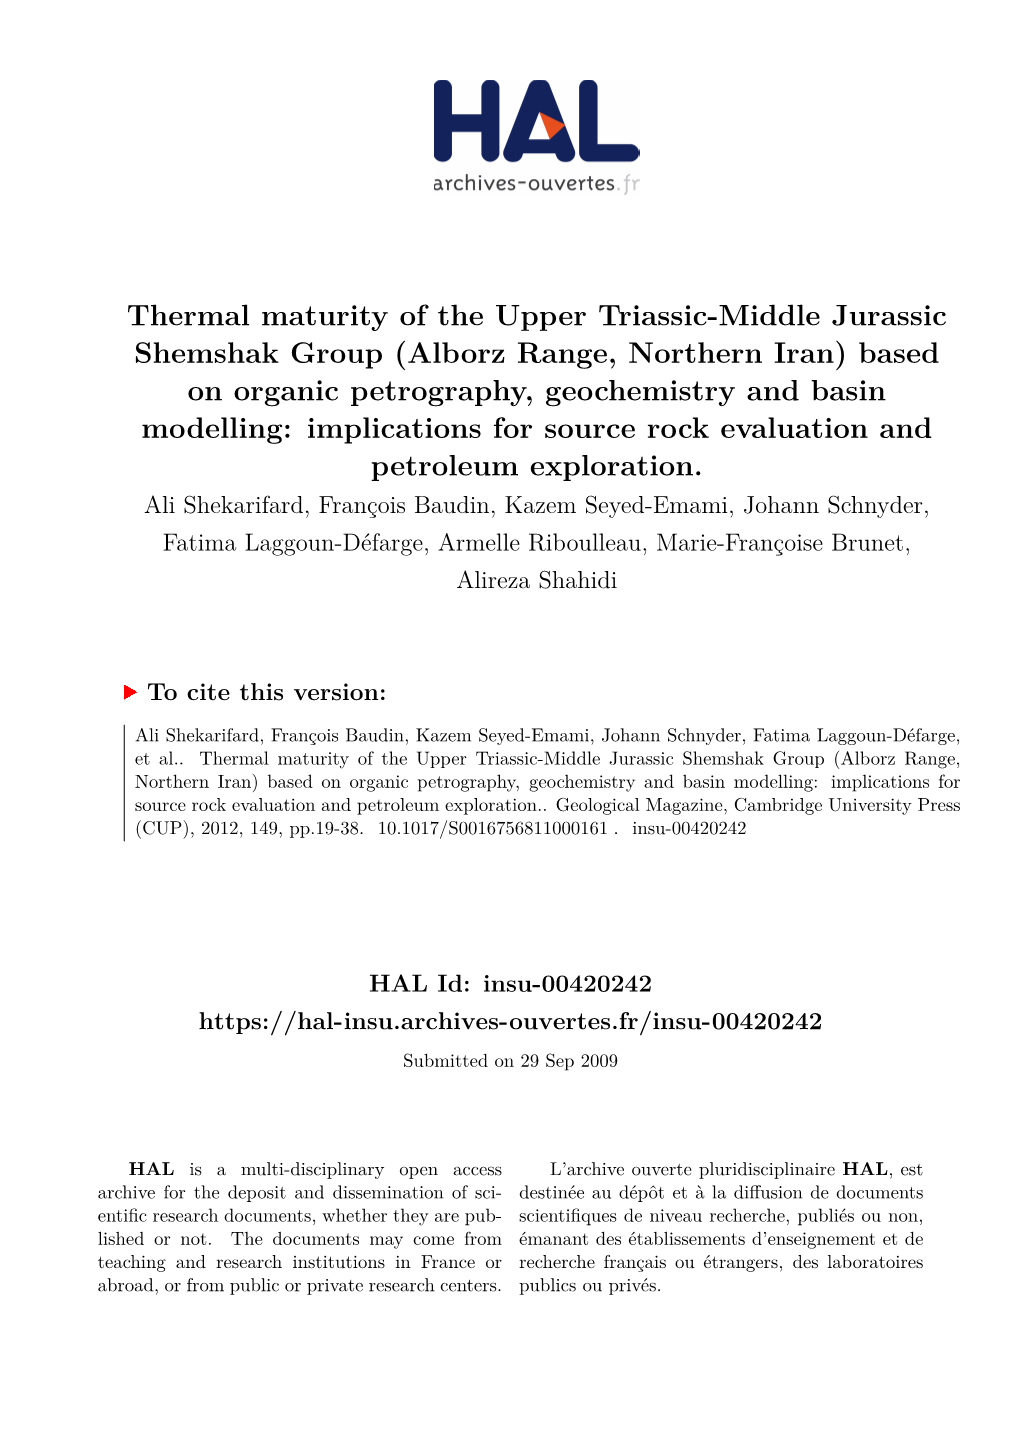 Thermal Maturity of the Upper Triassic-Middle Jurassic Shemshak Group